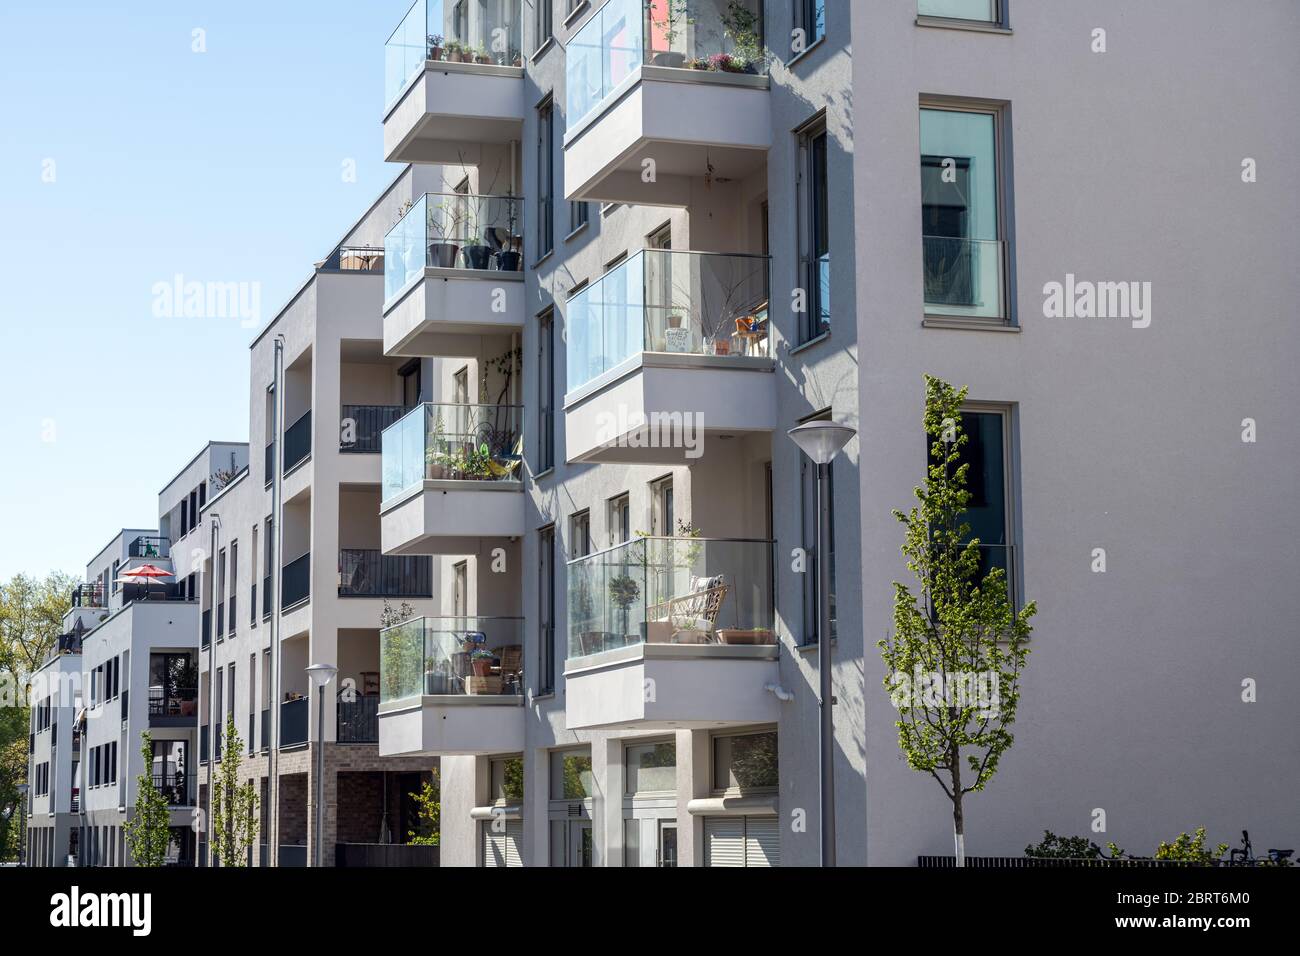 Modern multi-family apartment buildings seen in Berlin, Germany Stock Photo